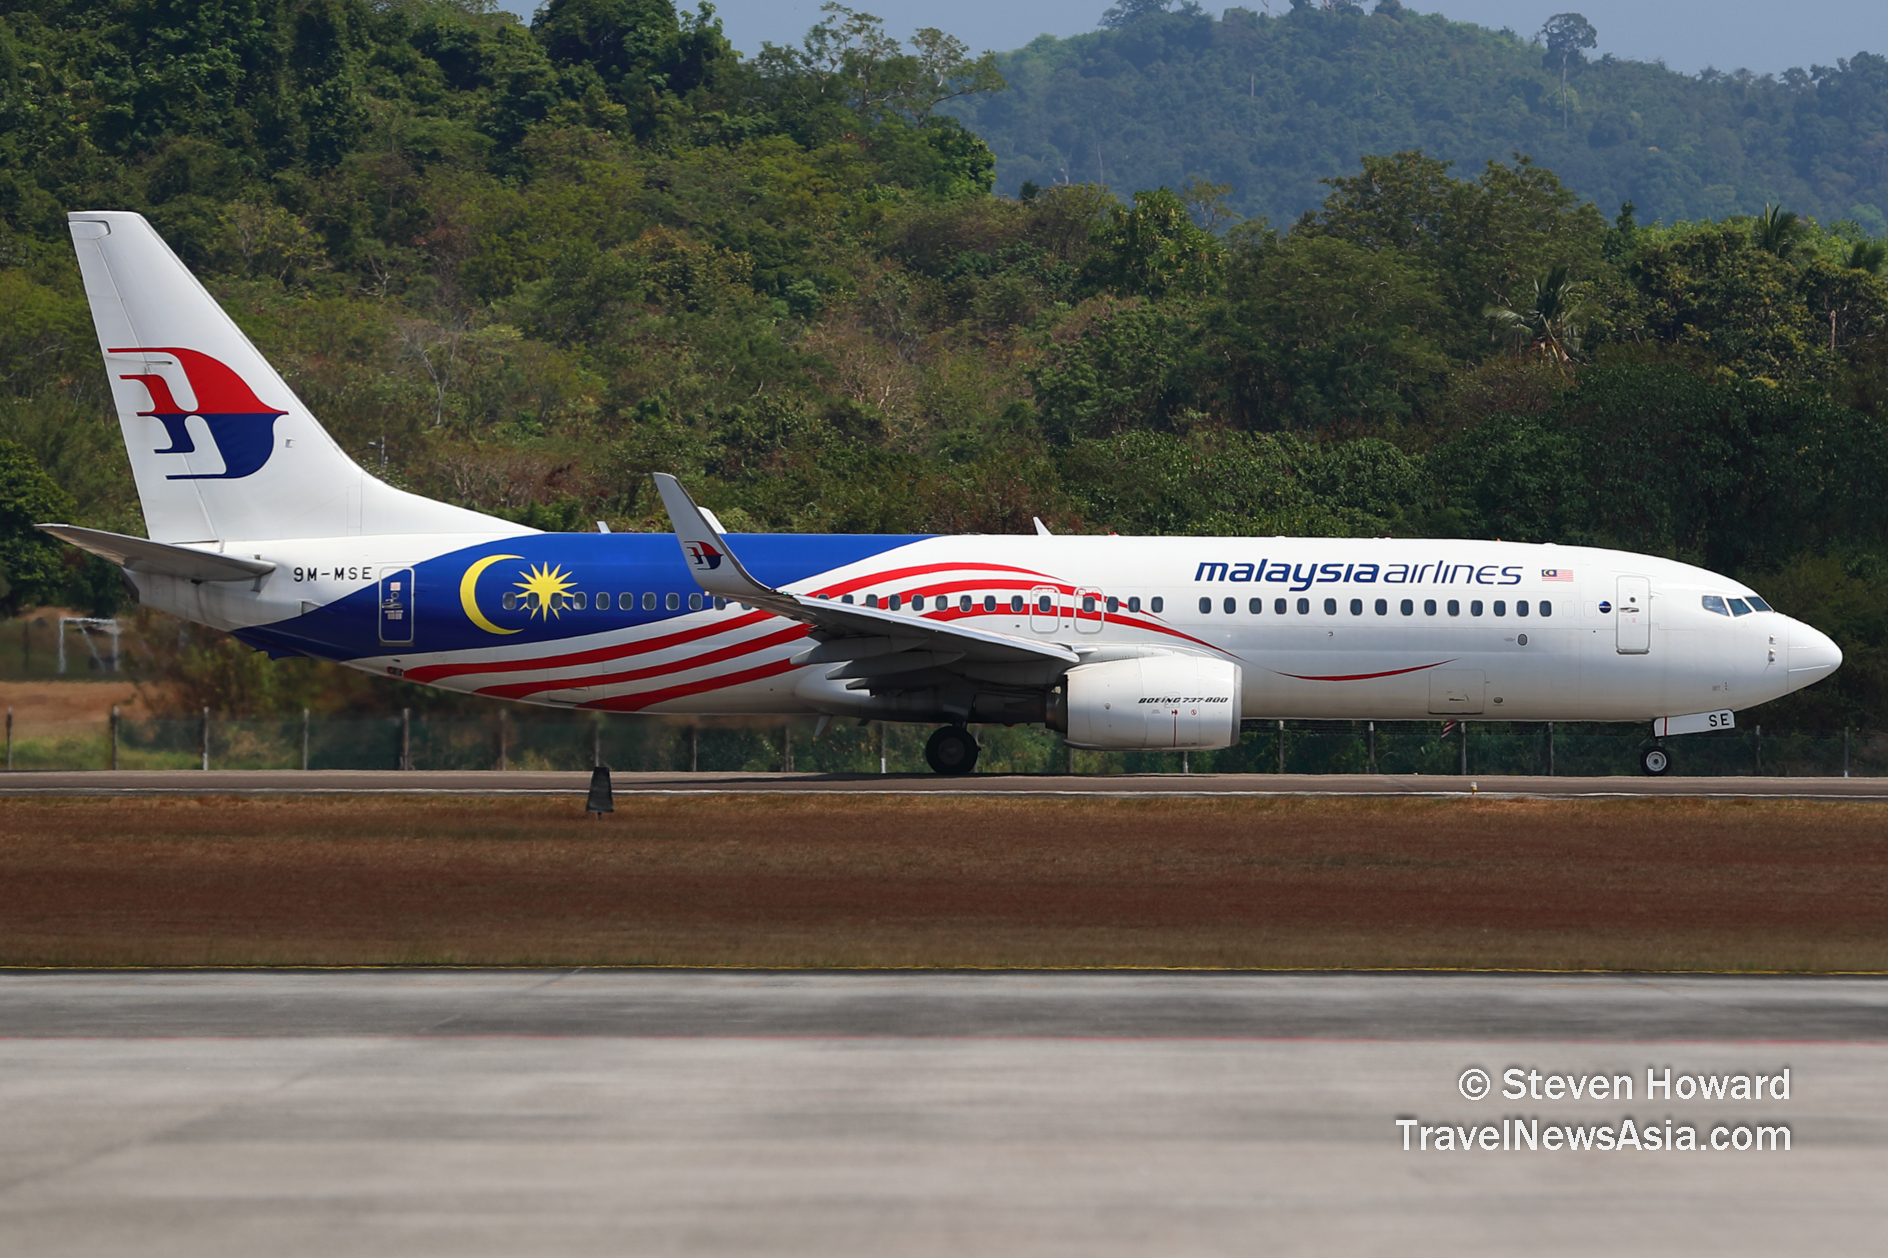 Malaysia Airlines Boeing 737-800 reg: 9M-MSE. Picture by Steven Howard of TravelNewsAsia.com Click to enlarge.